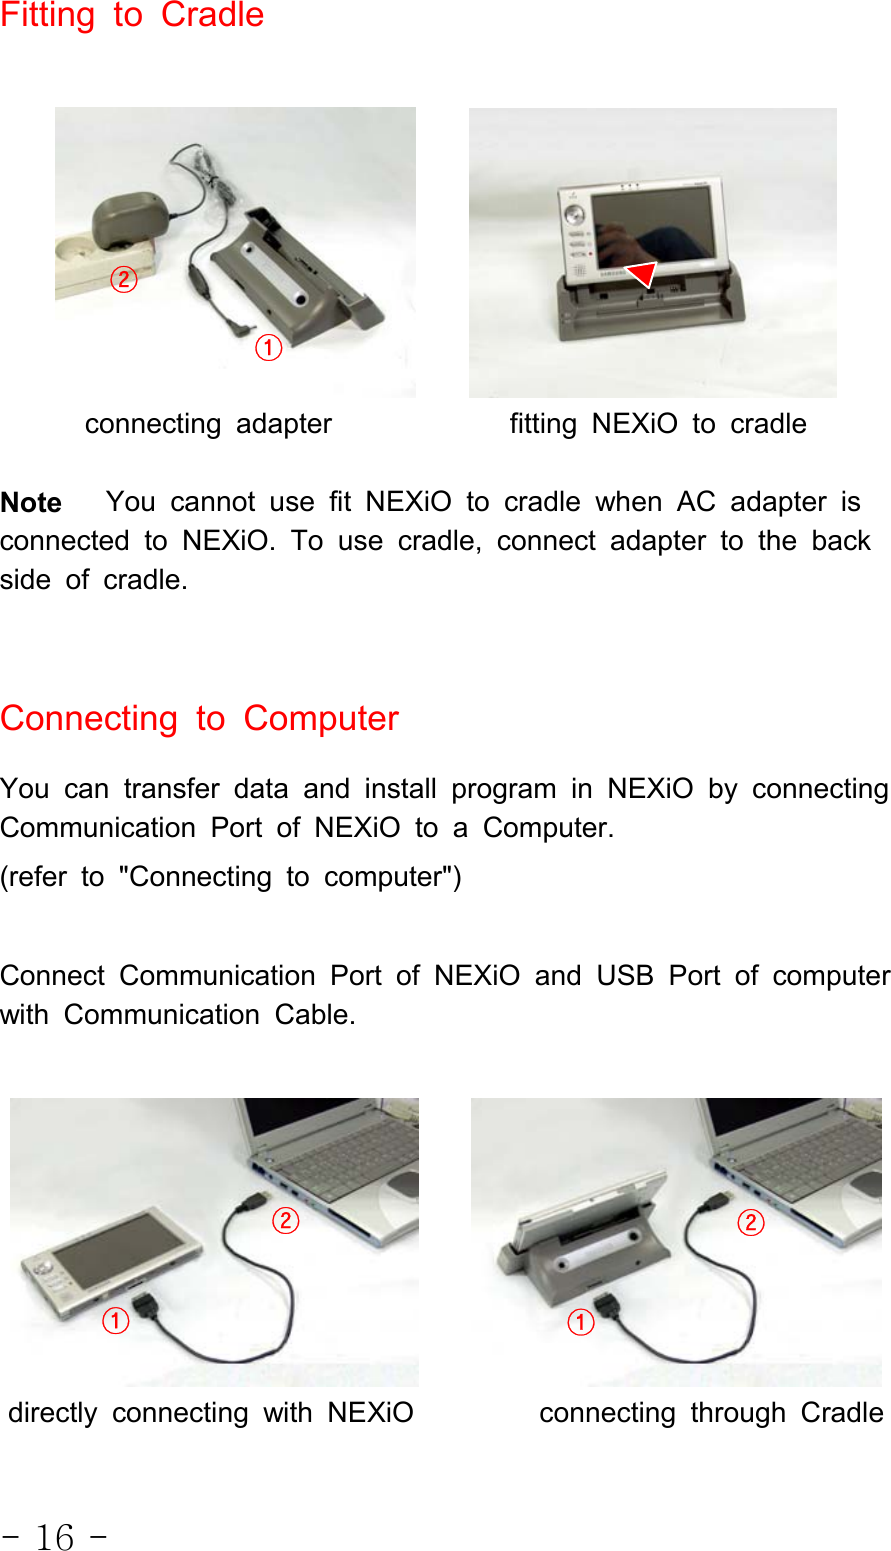 - 16 -FittingtoCradleconnecting adapter fitting NEXiO to cradleNote You cannot use fit NEXiO to cradle when AC adapter isconnected to NEXiO. To use cradle, connect adapter to the backside of cradle.Connecting to ComputerYou can transfer data and install program in NEXiO by connectingCommunication Port of NEXiO to a Computer.(refer to &quot;Connecting to computer&quot;)Connect Communication Port of NEXiO and USB Port of computerwith Communication Cable.directly connecting with NEXiO connecting through Cradle①②①②②①